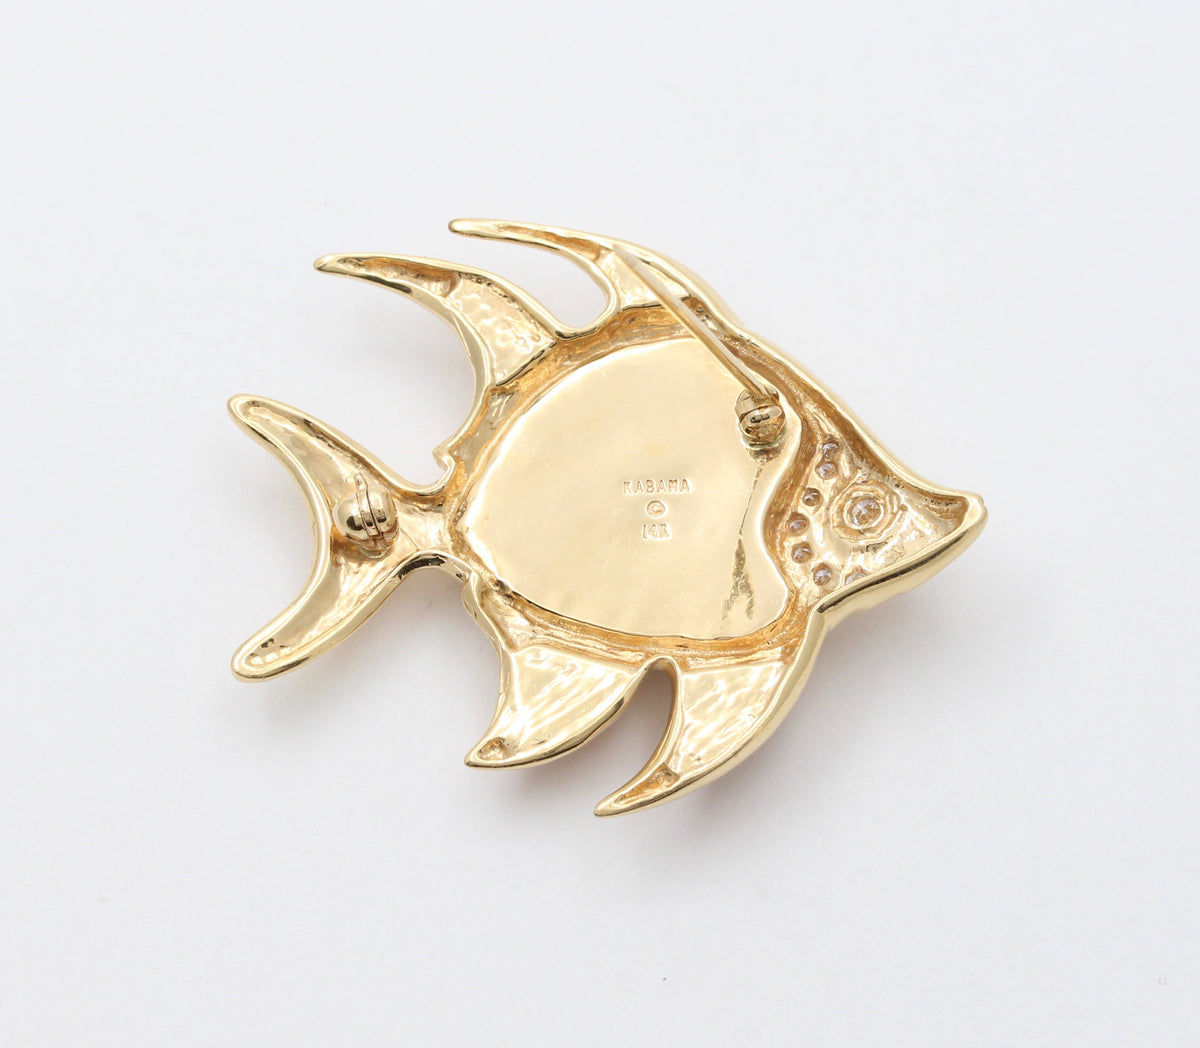 Vintage 14K Gold, Diamond, and Carved Agate Tropical Fish Pin, Brooch